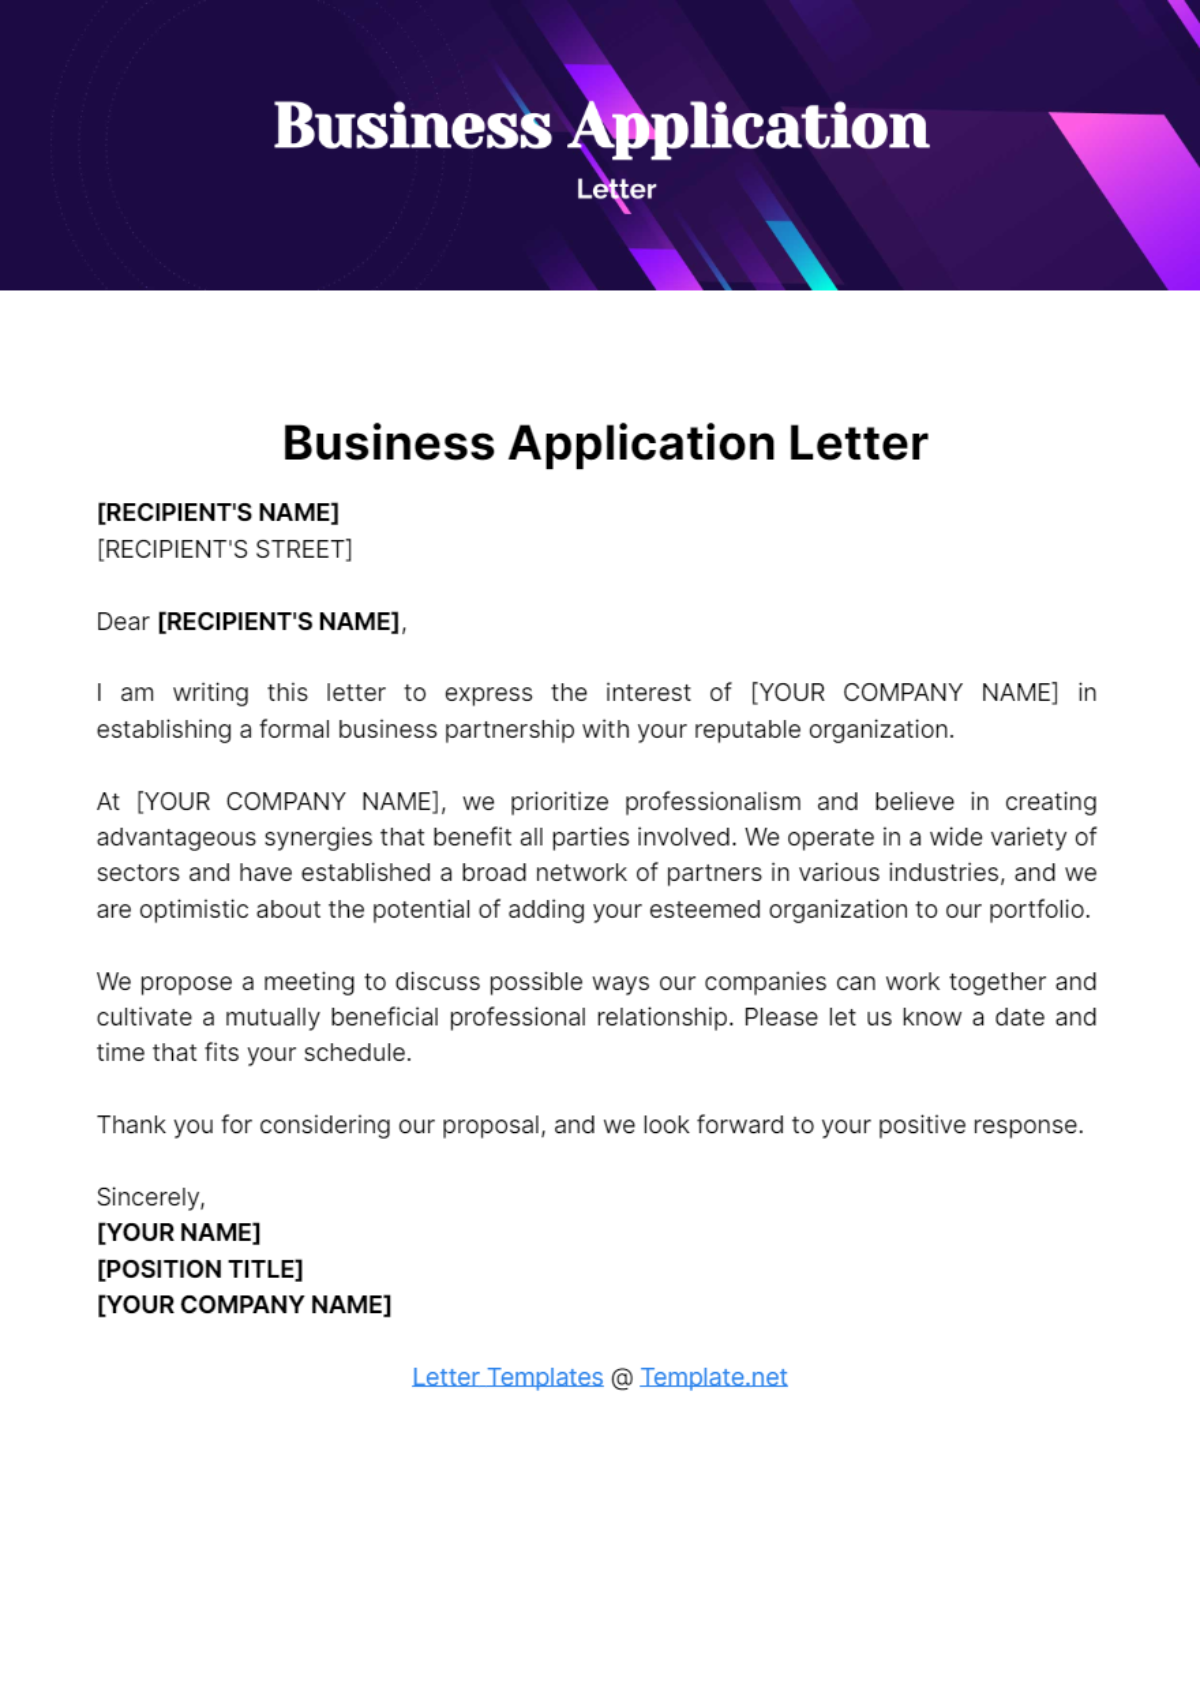 Free Business Application Letter Template